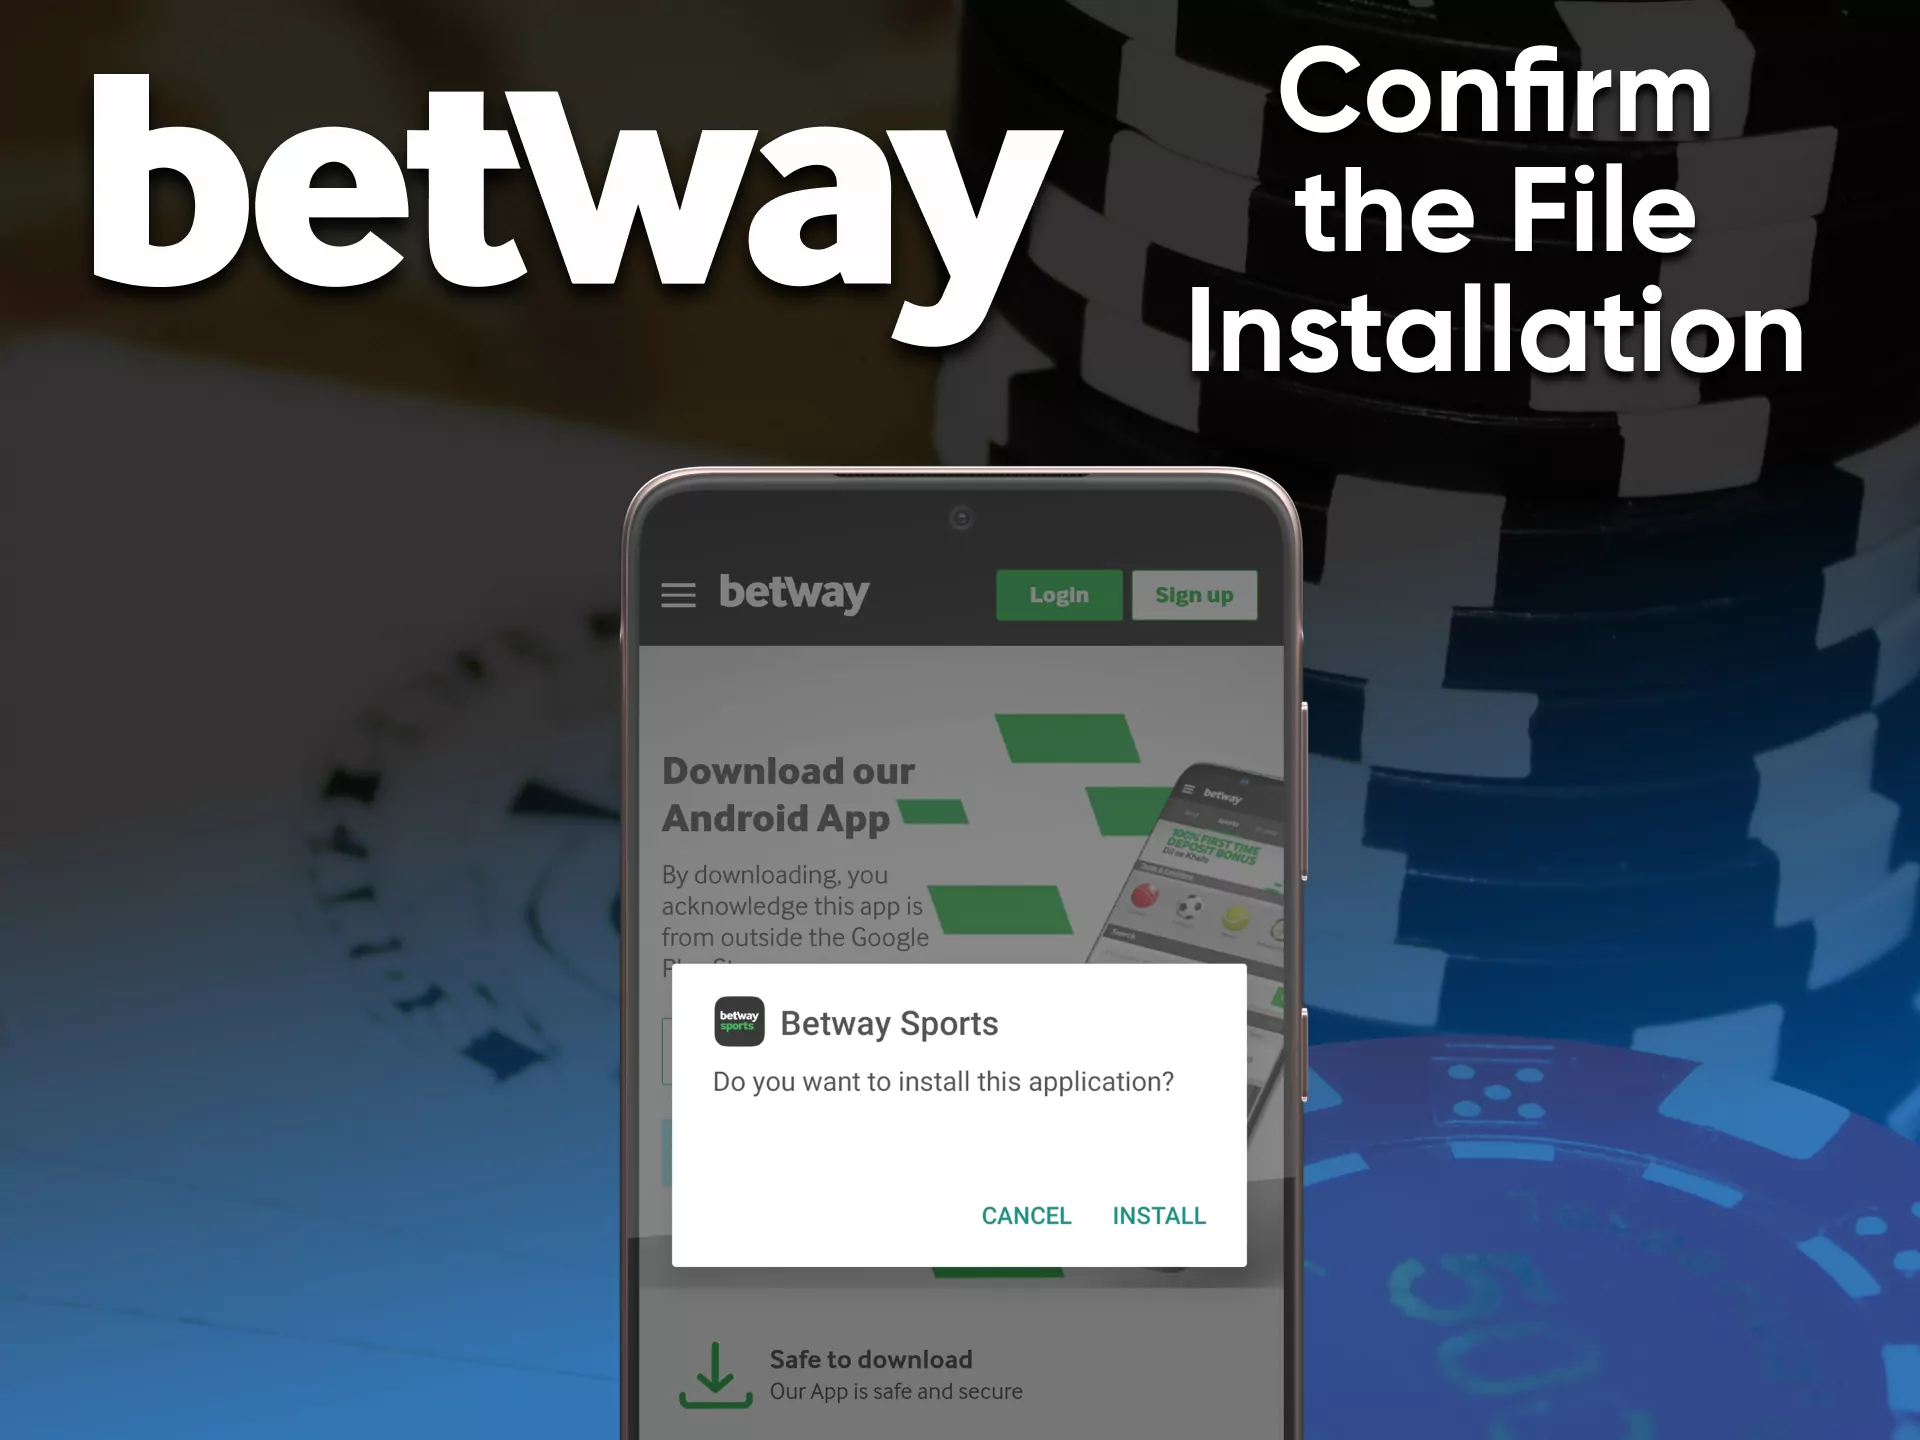 Install the app for the Betway casino games.